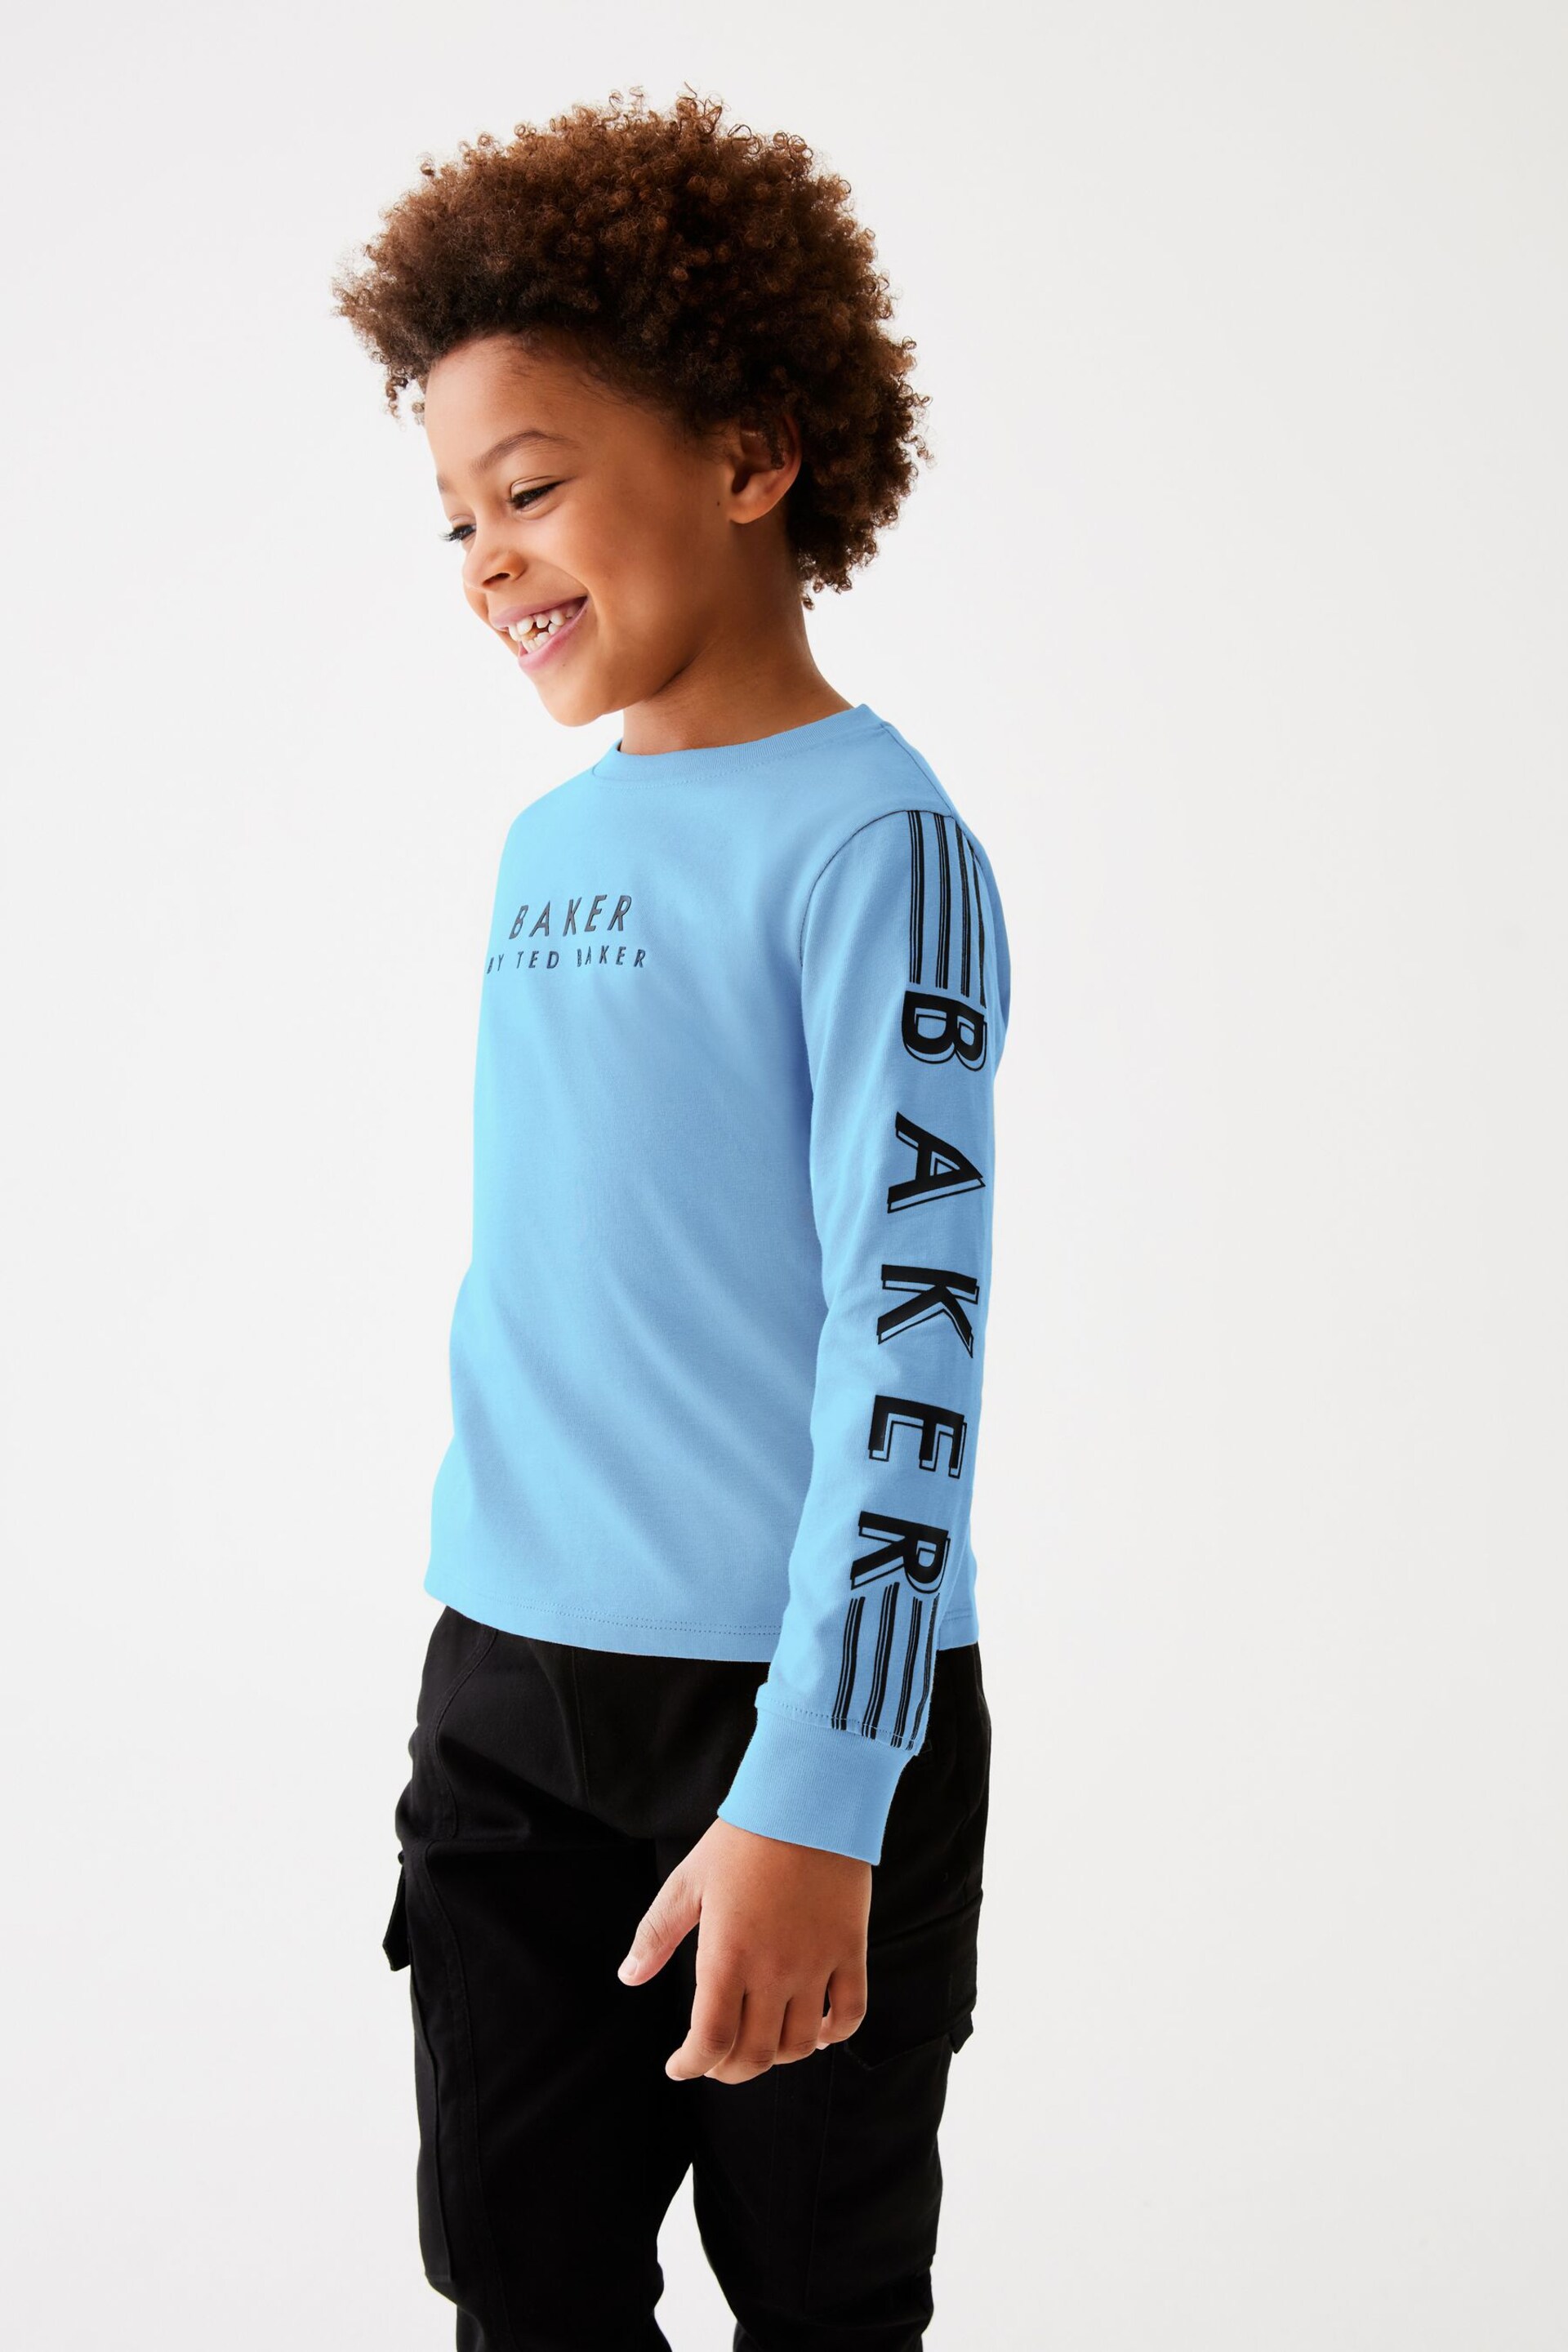 Baker by Ted Baker Long Sleeve T-Shirt - Image 5 of 14